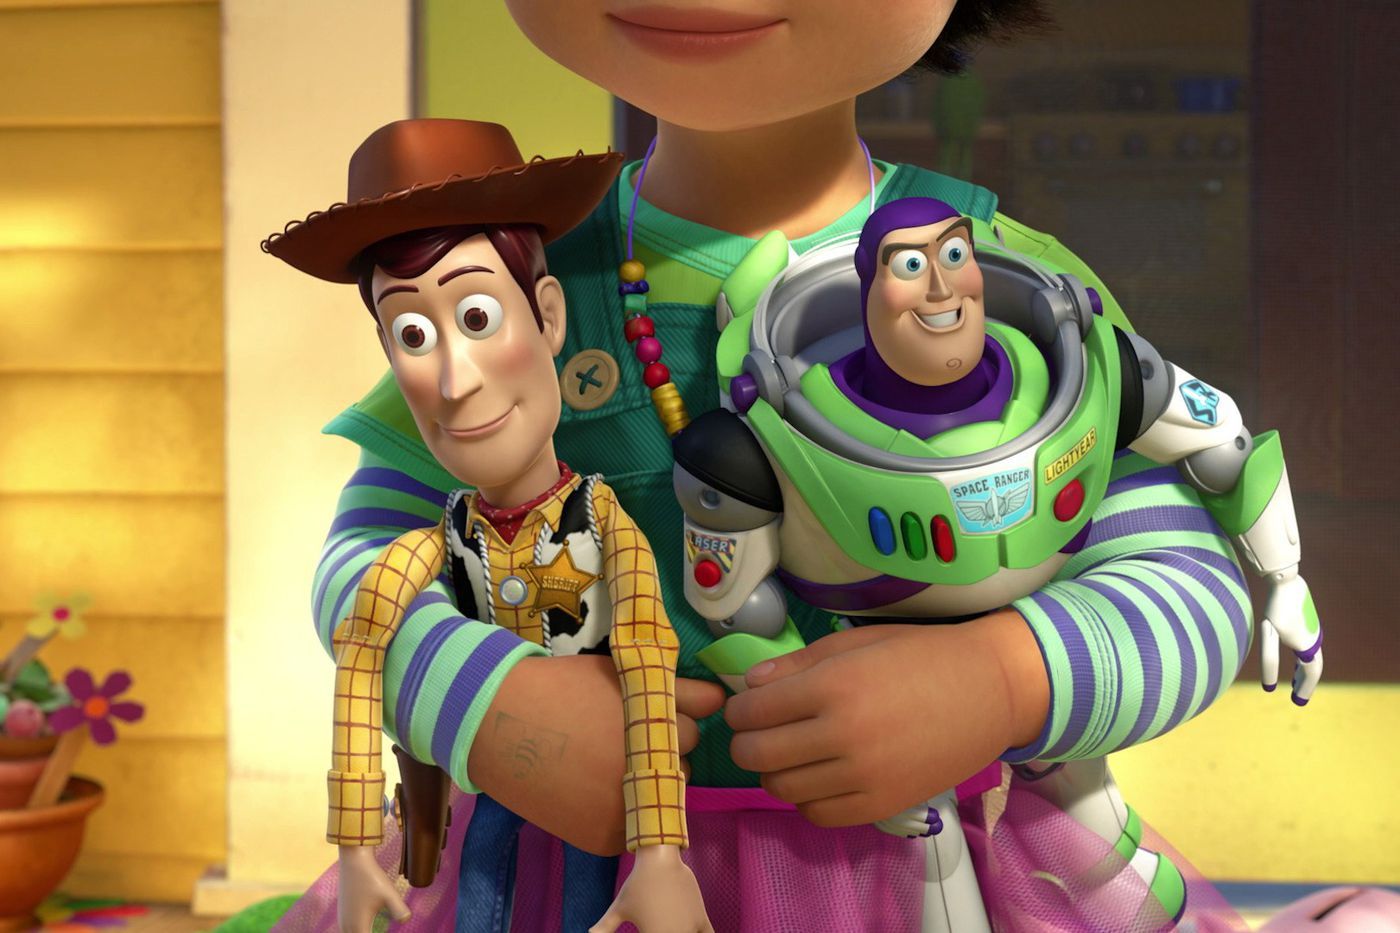 The Toy Story movies are really about Woody growing from child to.